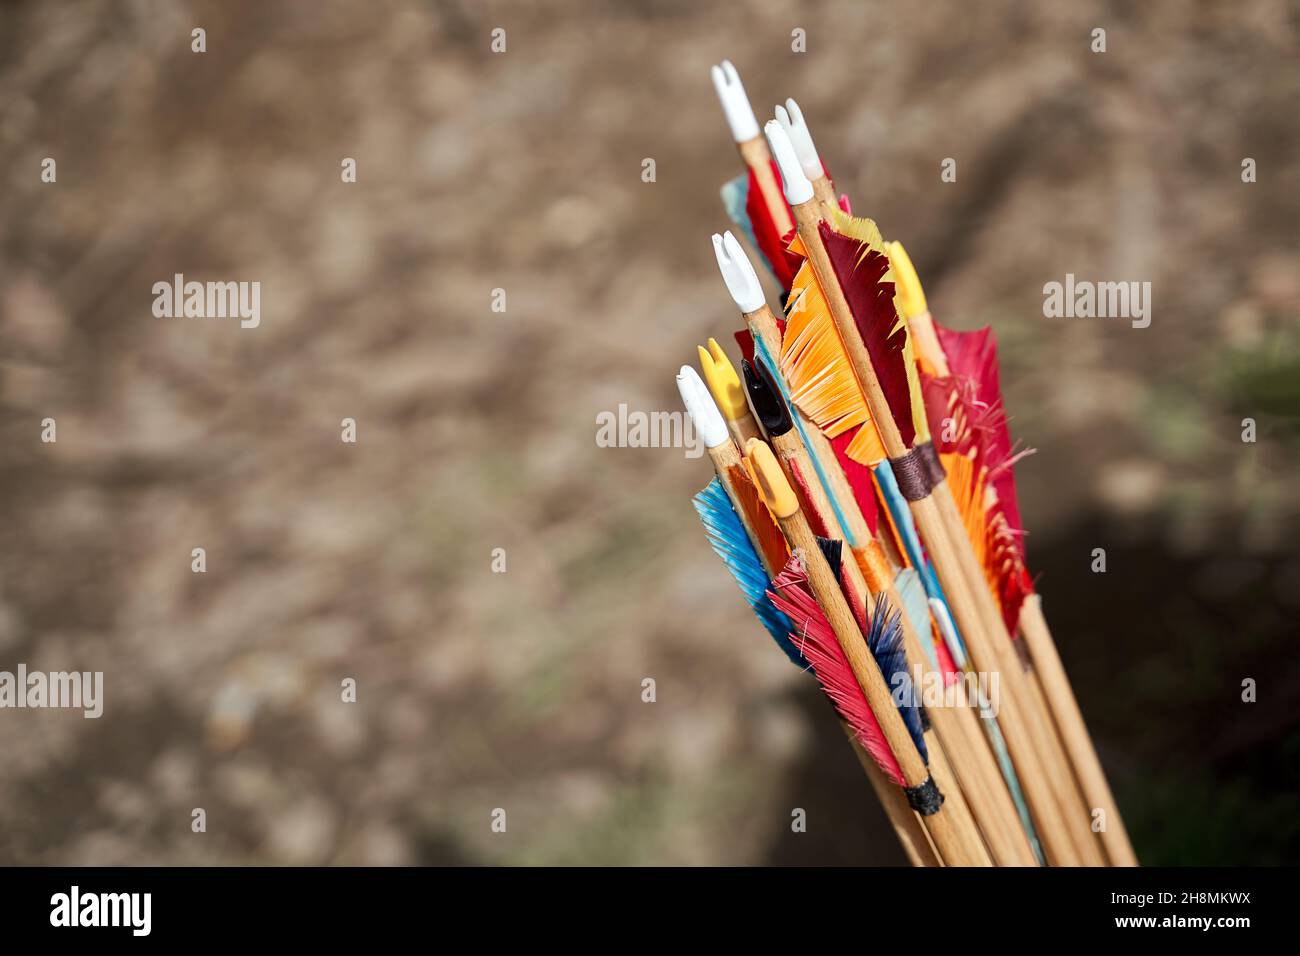 Colorful fletching of arrows. A fin-shaped aerodynamic stabilization. Copy space. Stock Photo